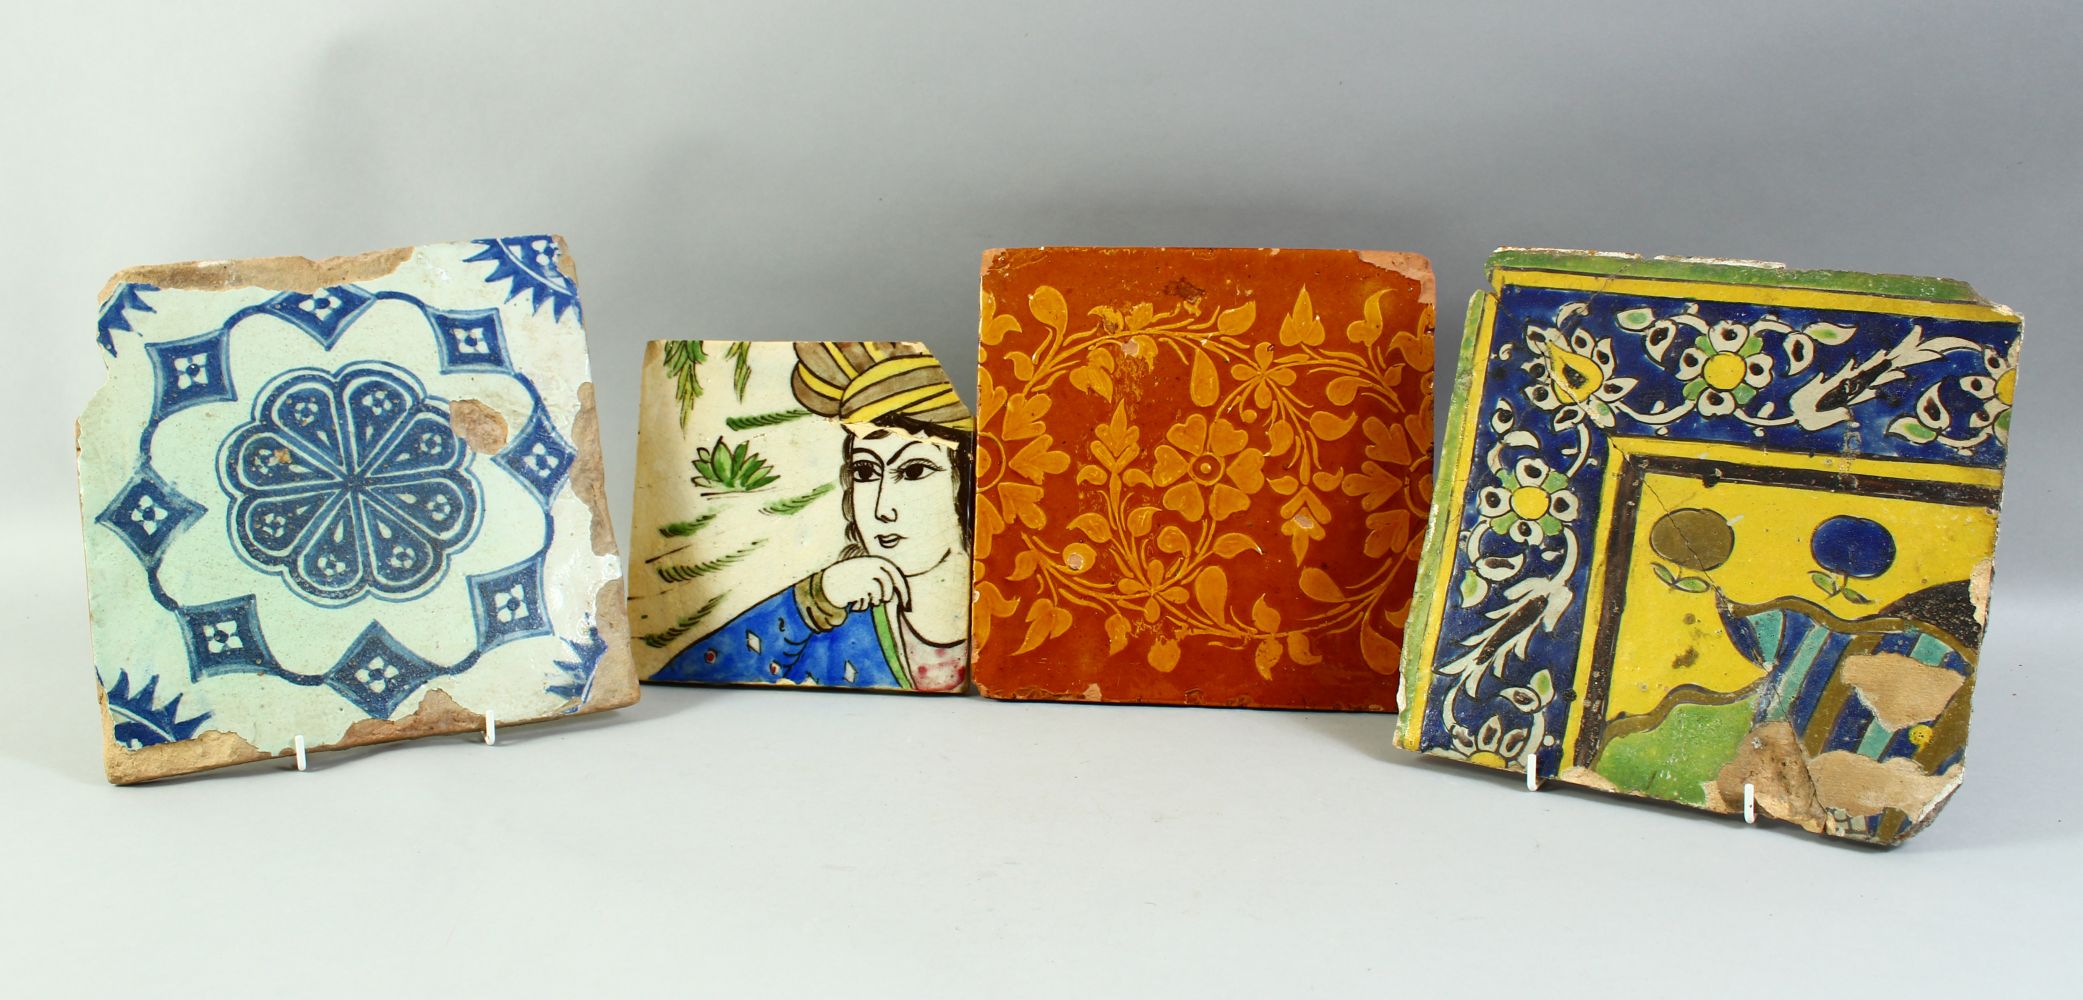 FOUR ISLAMIC GLAZED POTTERY TILES, three with foliate decoration and one with a section of a figure,